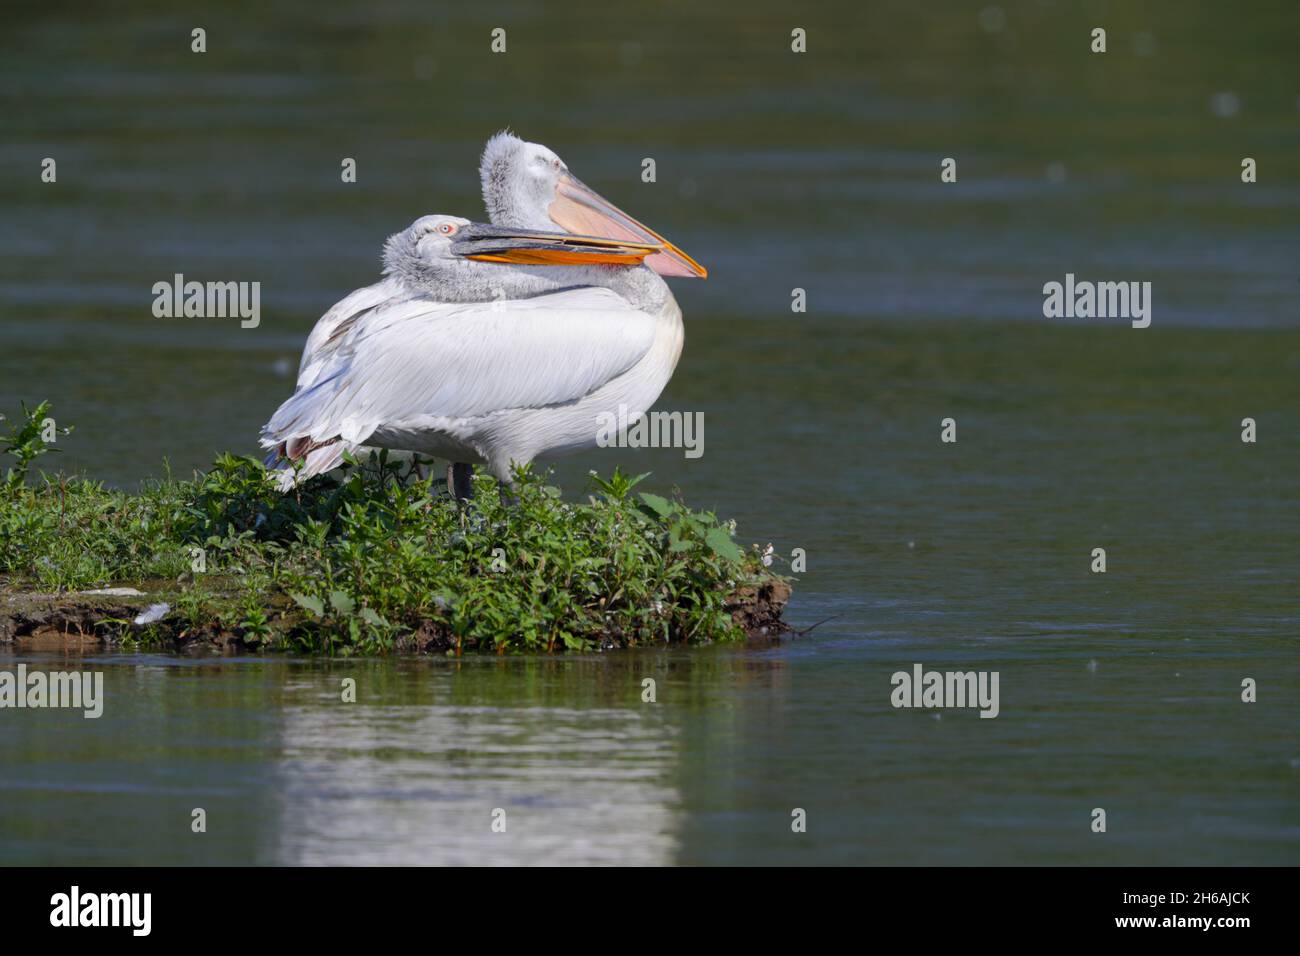 An adult Dalmatian pelican (Pelecanus crispus) in breeding plumage in spring, perched out of the water by Lake Kerkini in northern Greece Stock Photo